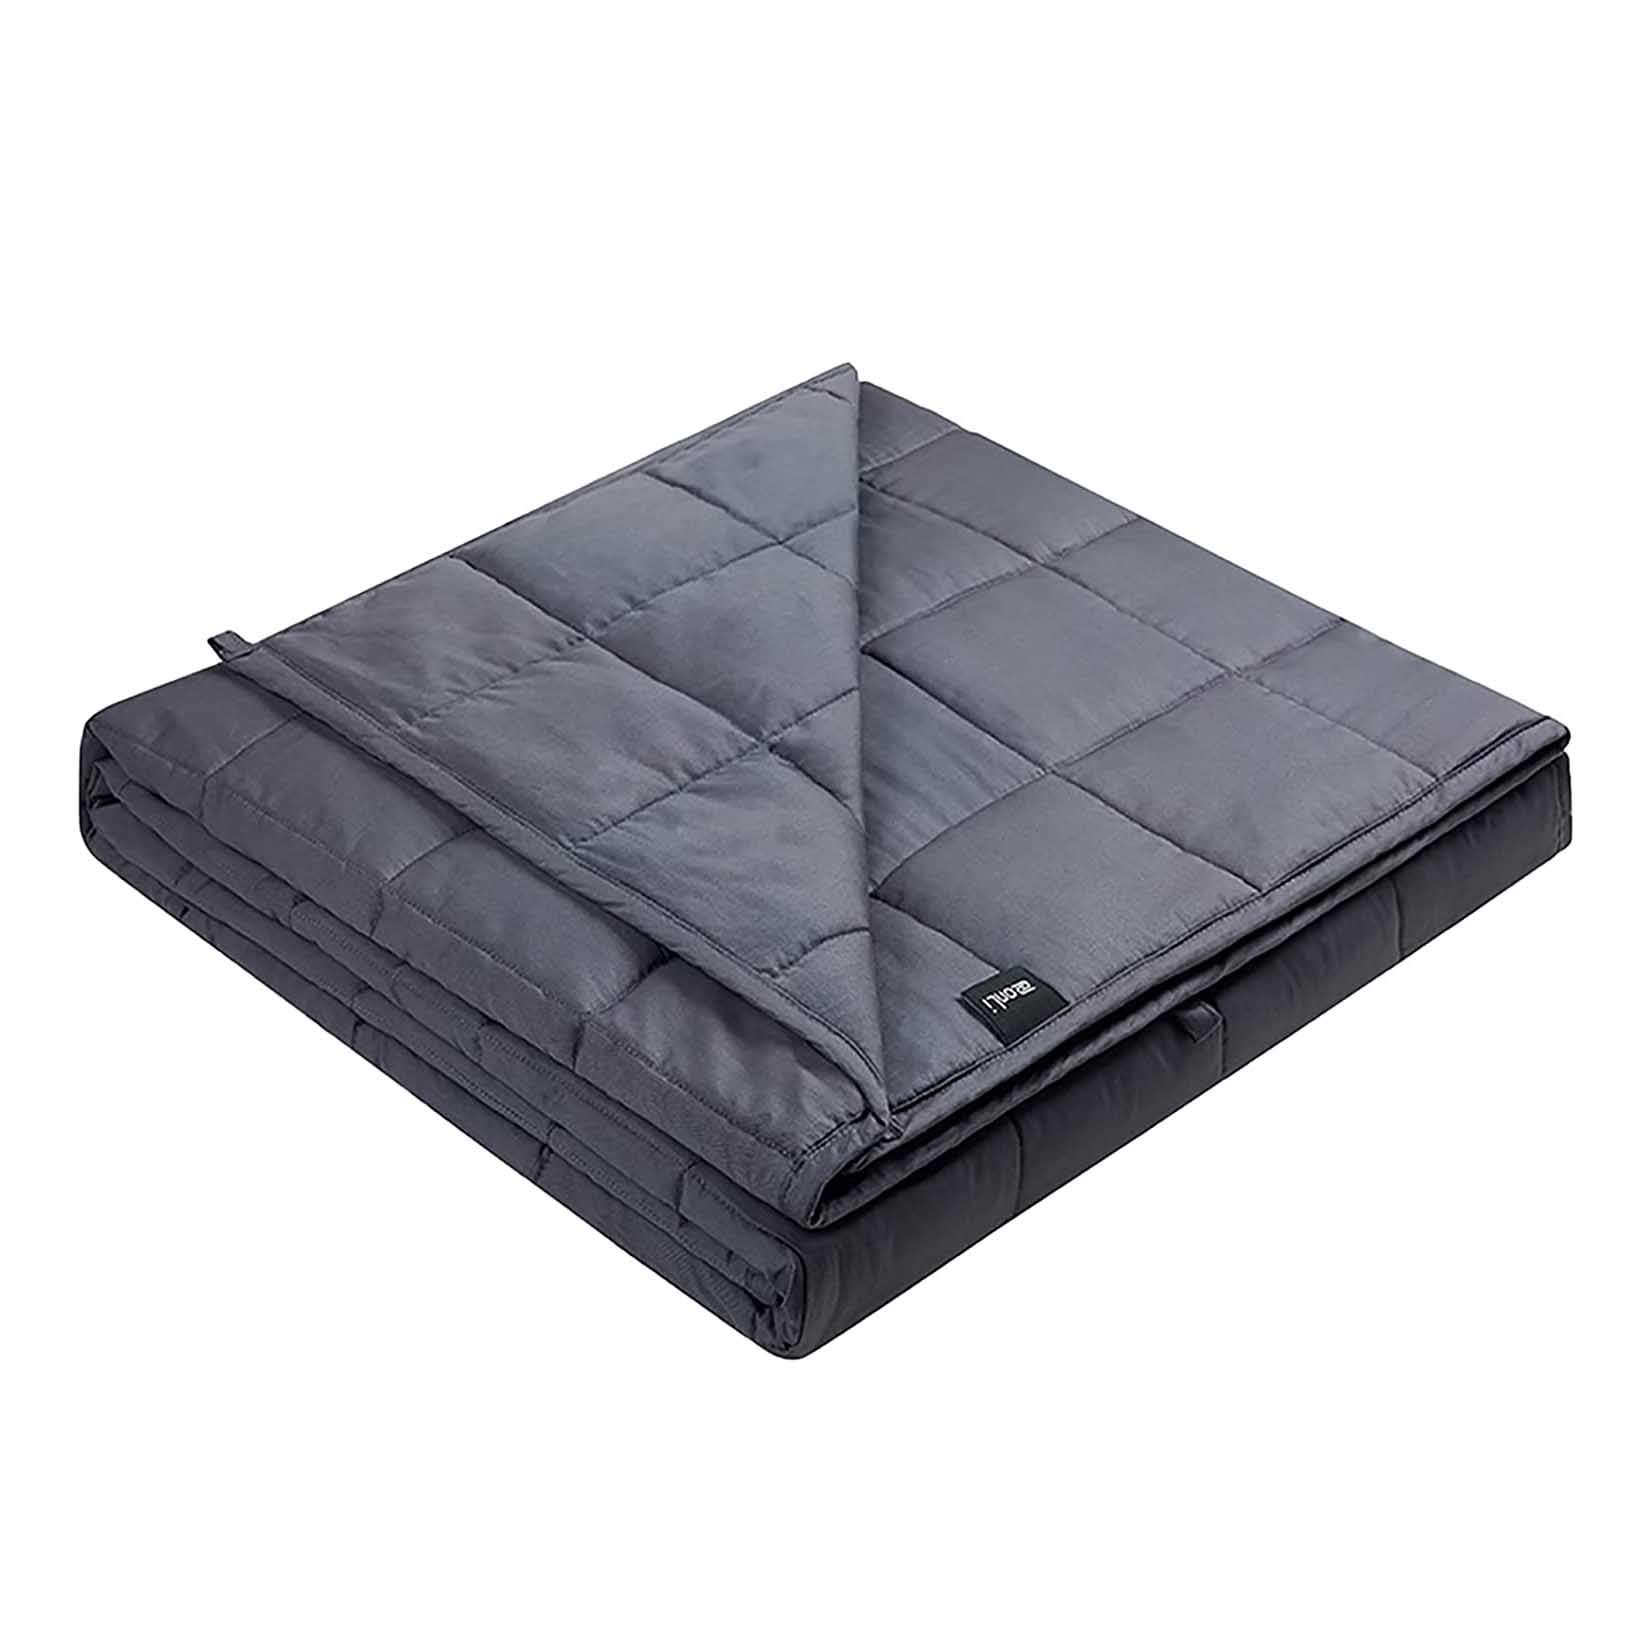 Best OEM Weighted Knit Blanket Exporter- Weighted Blanket (60”x80”, 20lbs, Dark Grey), Cooling Weighted Blanket for Adults, High Breathability Heavy Blanket, Soft Material with Premium...